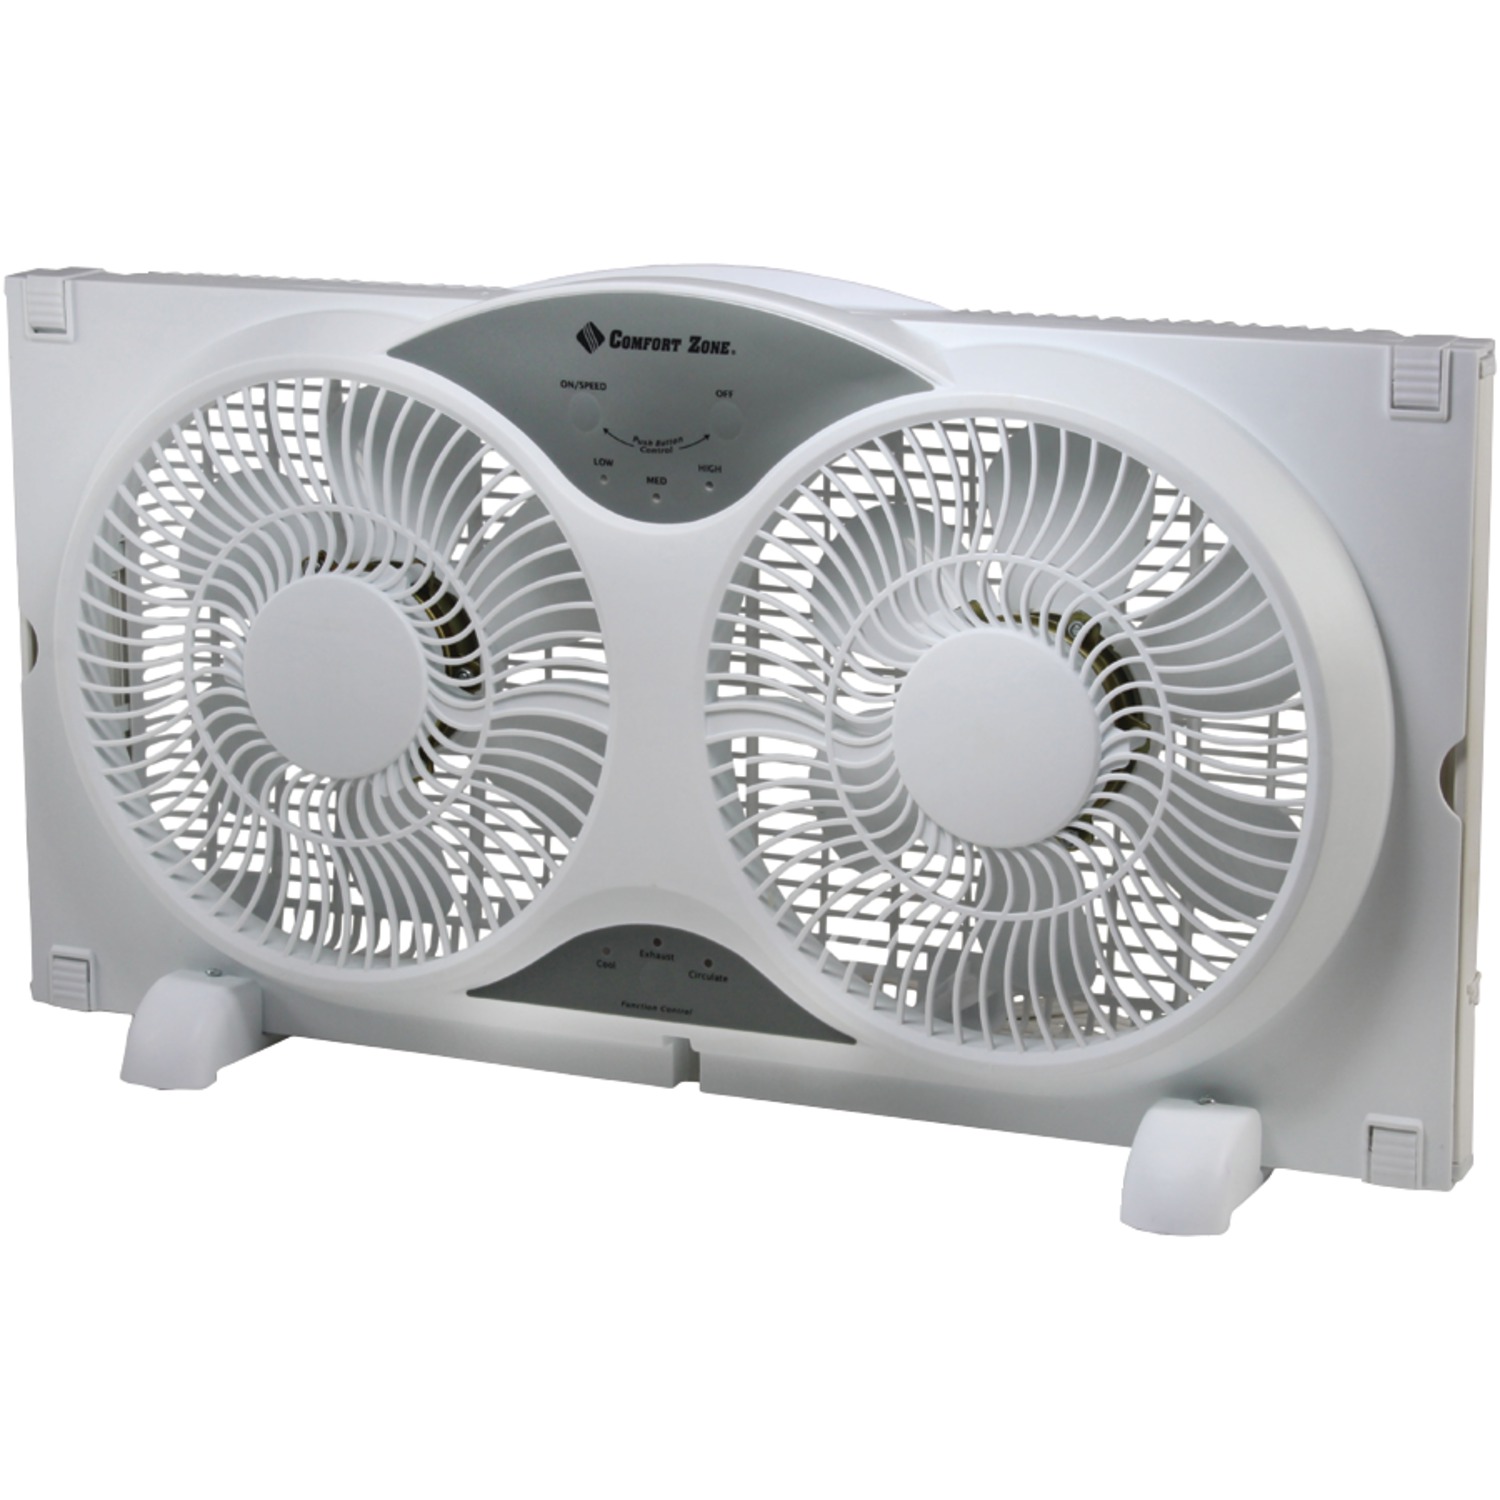 dual window fans with remote